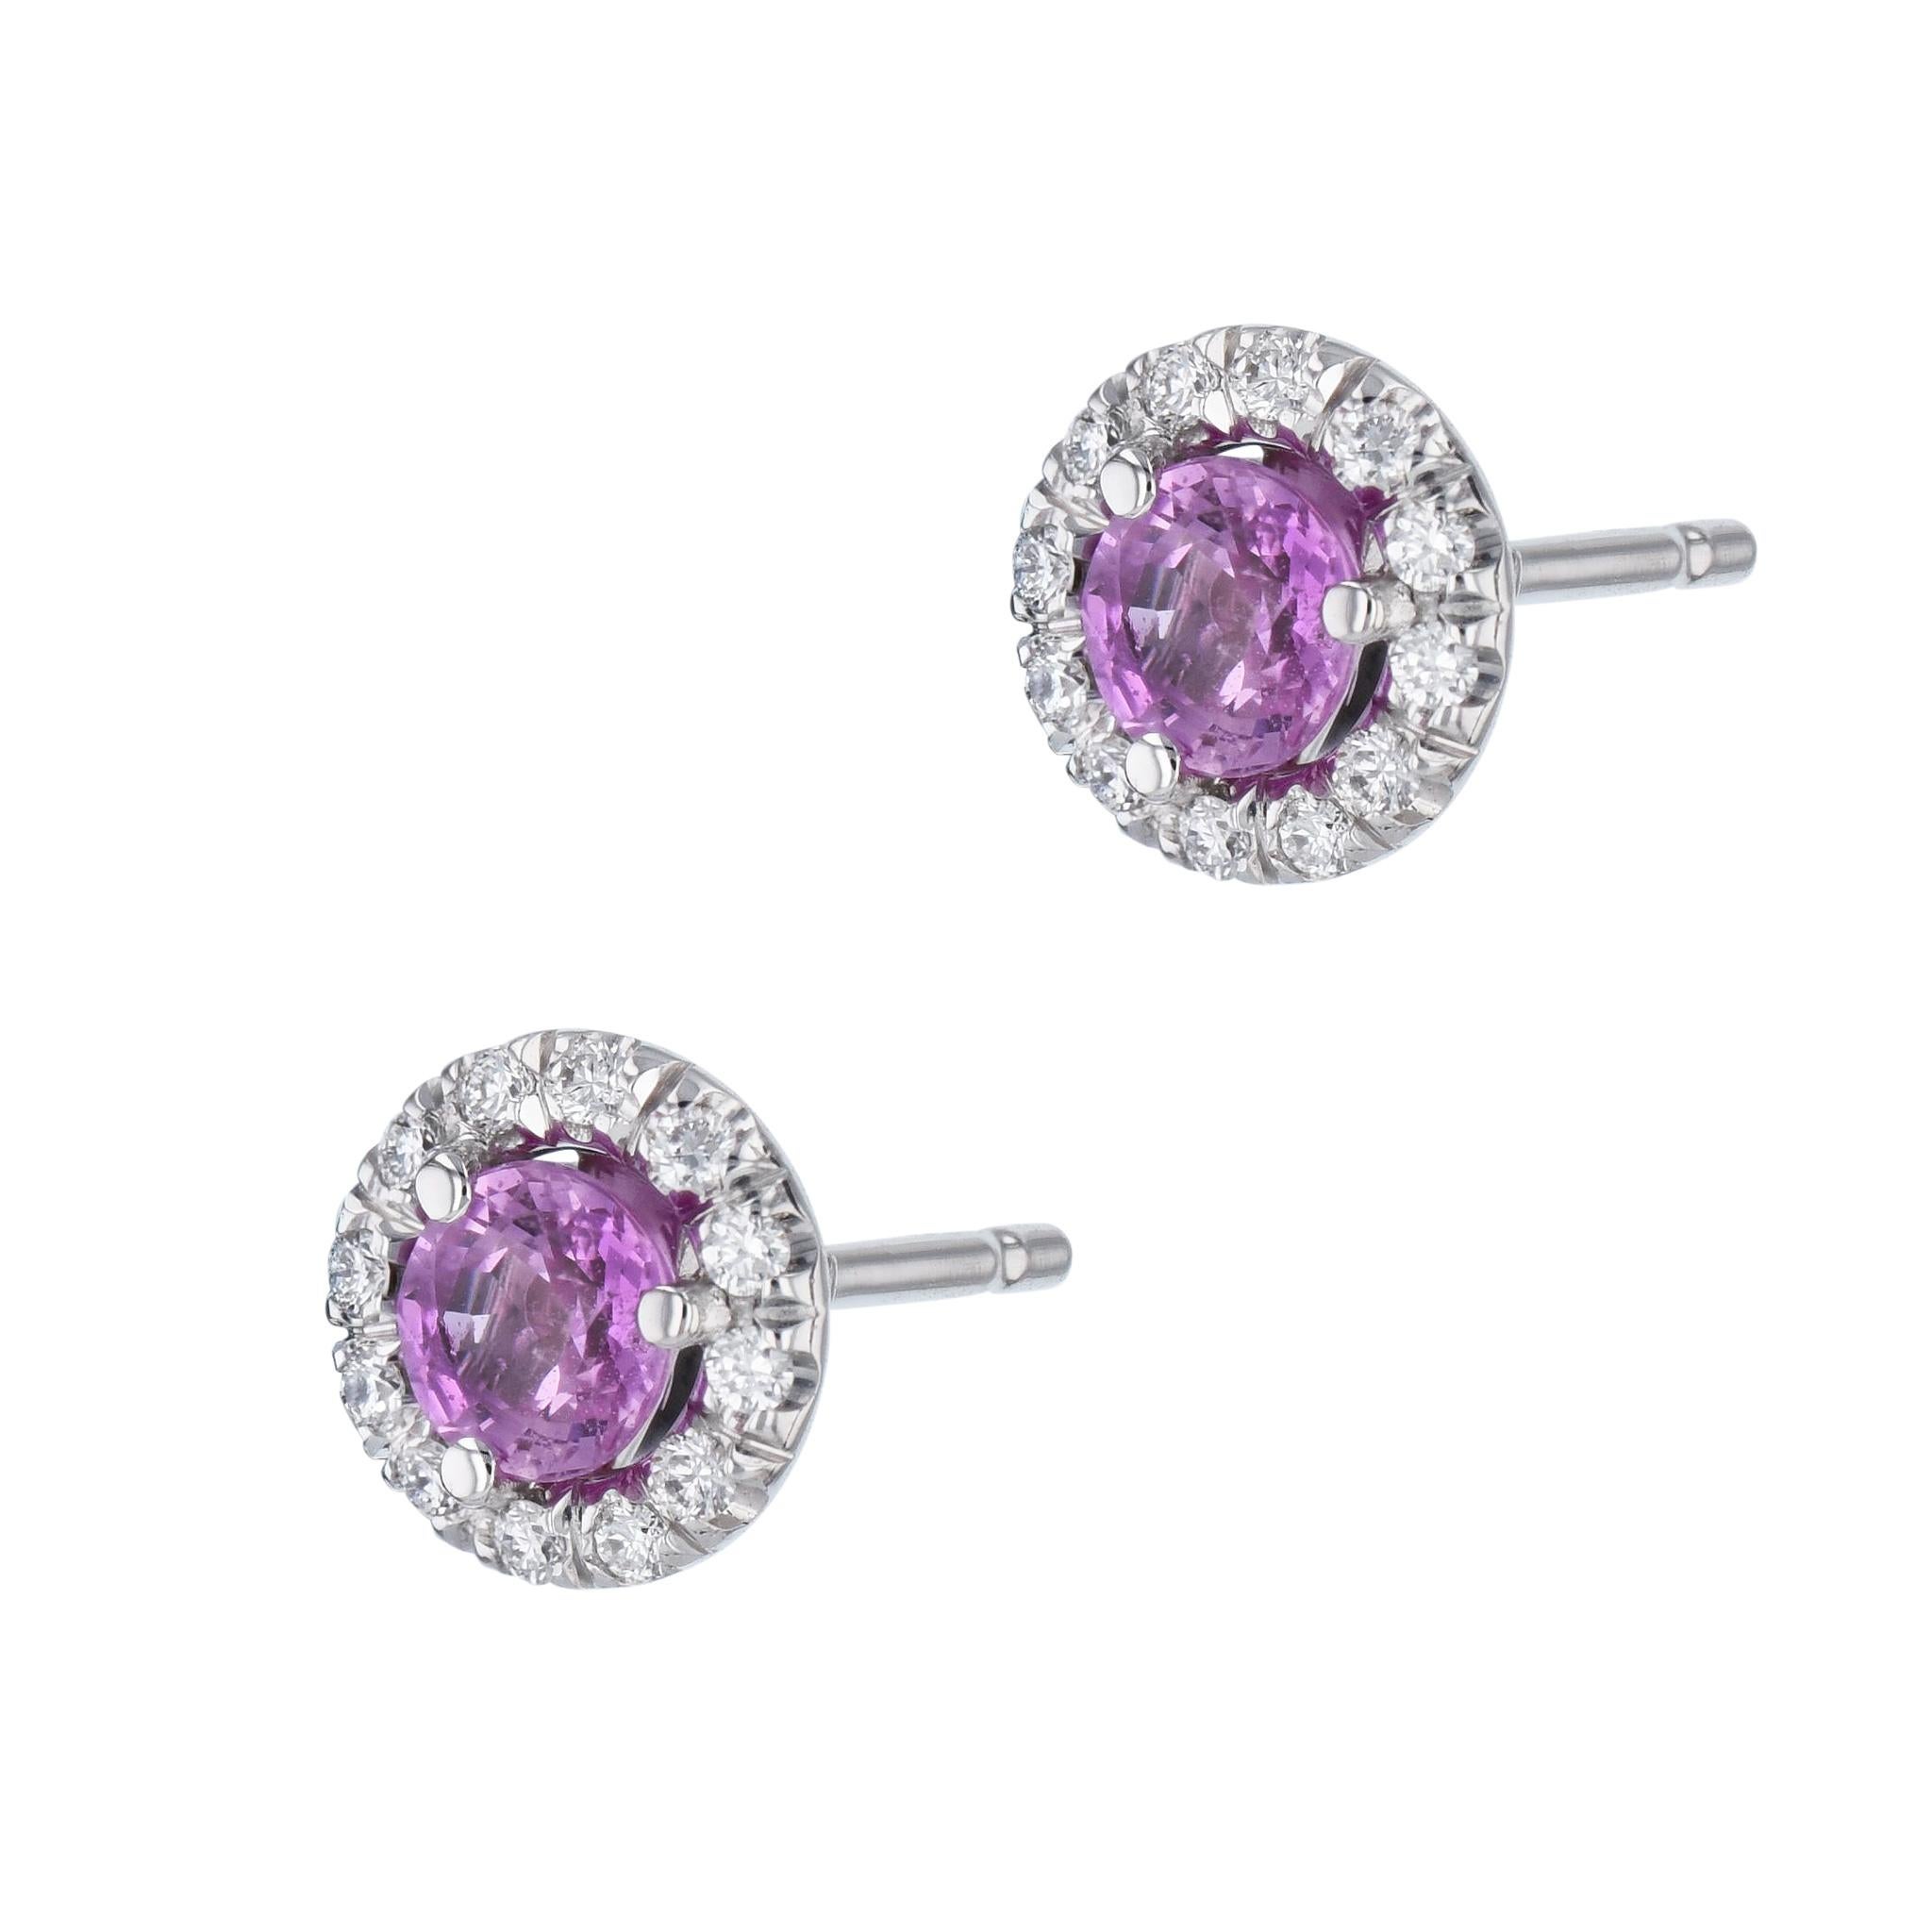 These beautiful pink sapphire pave diamond halo stud Earrings are handcrafted with 18 karat white gold for an exquisite finish. The centerpiece pink sapphire, is encircled with a halo of 24 sparkling diamonds. Make this H&H piece yours for a truly